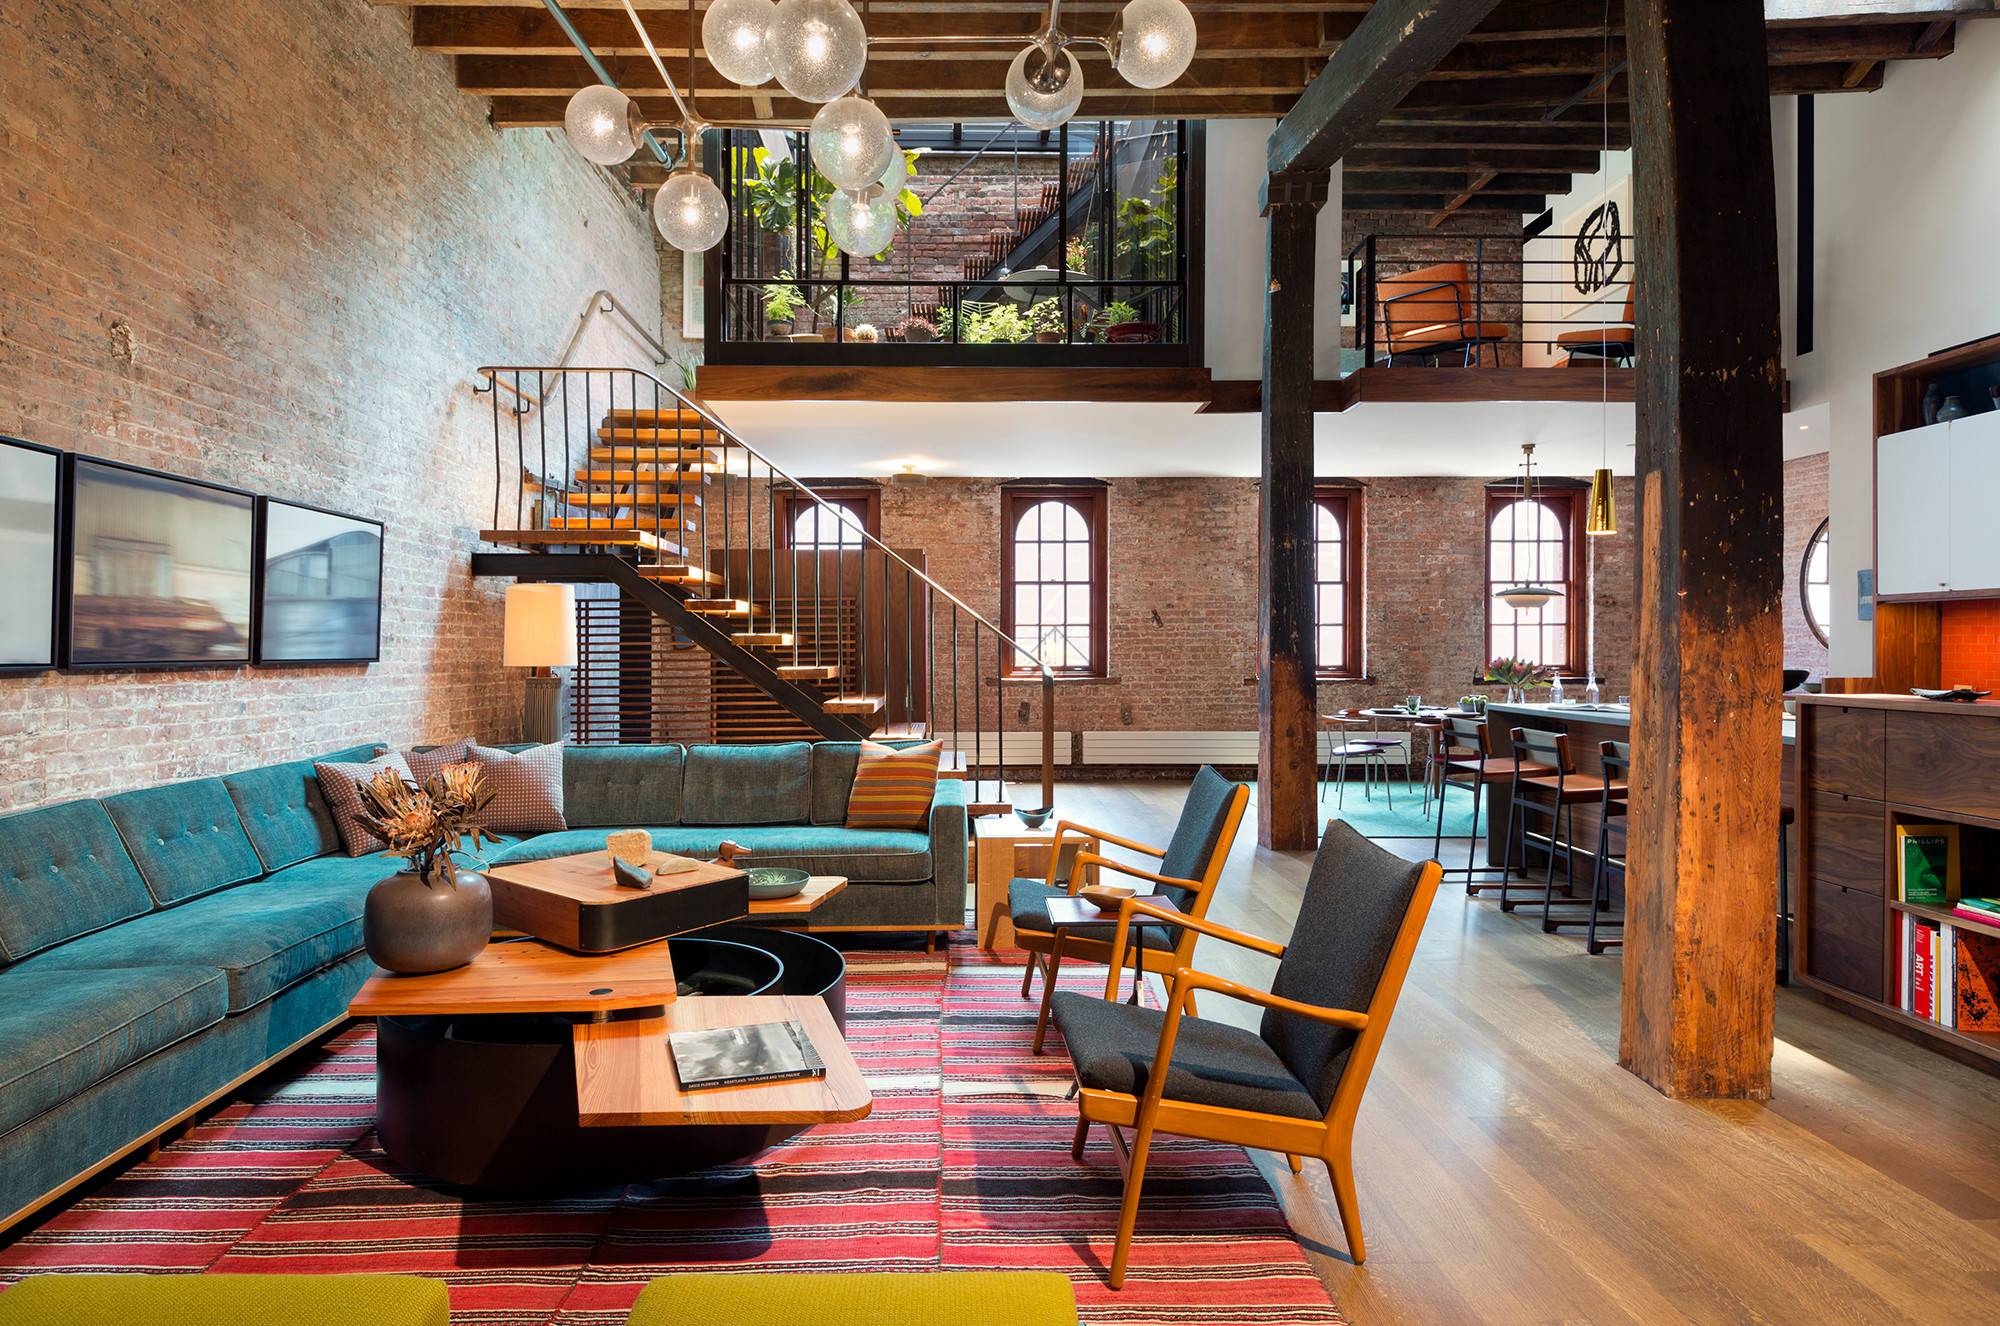 Colors in industrial style are welcomed (from Houzz)